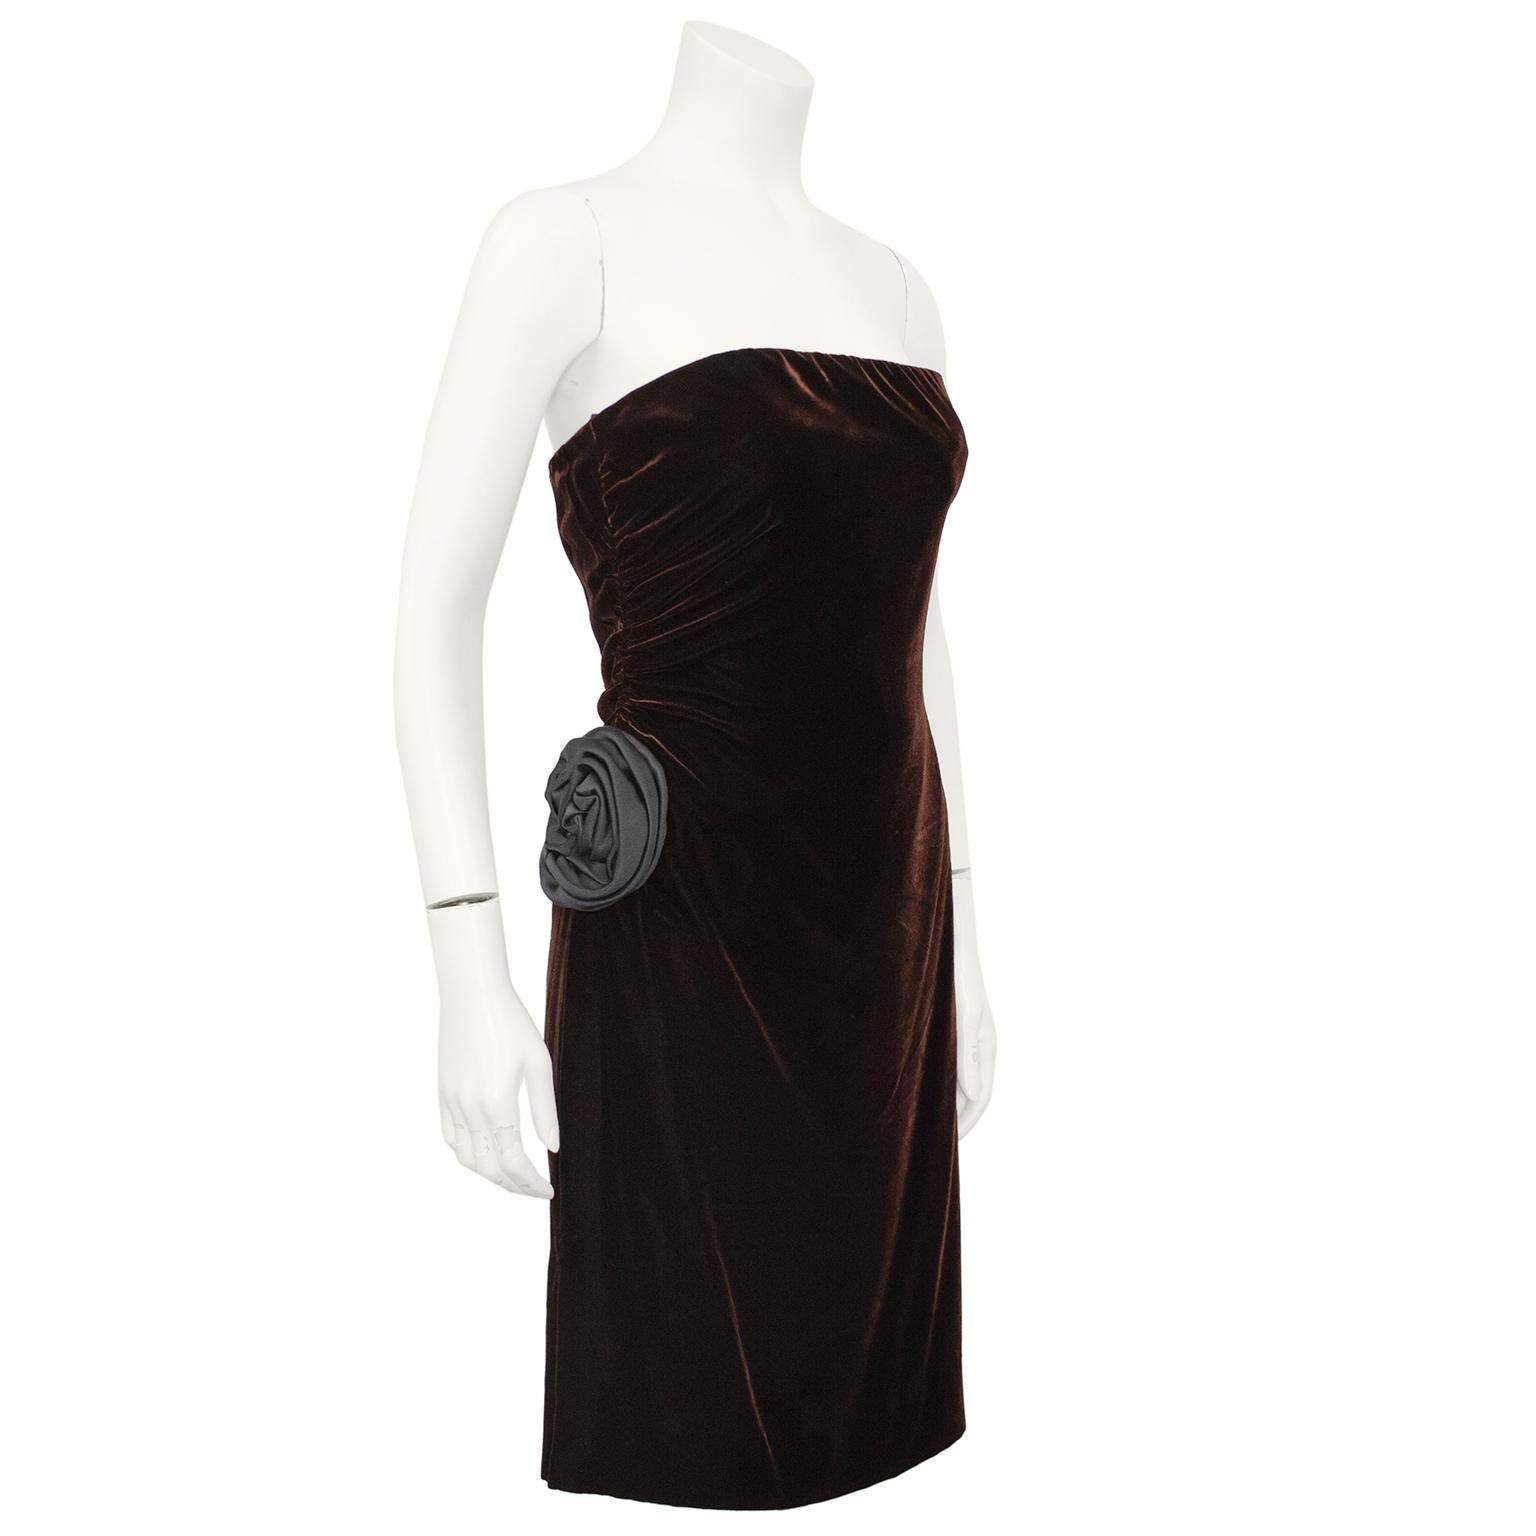 Rich, deep and sexy Giorgio Armani chocolate brown cut velvet cocktail dress from the 1990s. Strapless with ruching on the left side seam with a dark grey silk rosette applique at the left hip. Full interior corset, so the dress fits snug and lays